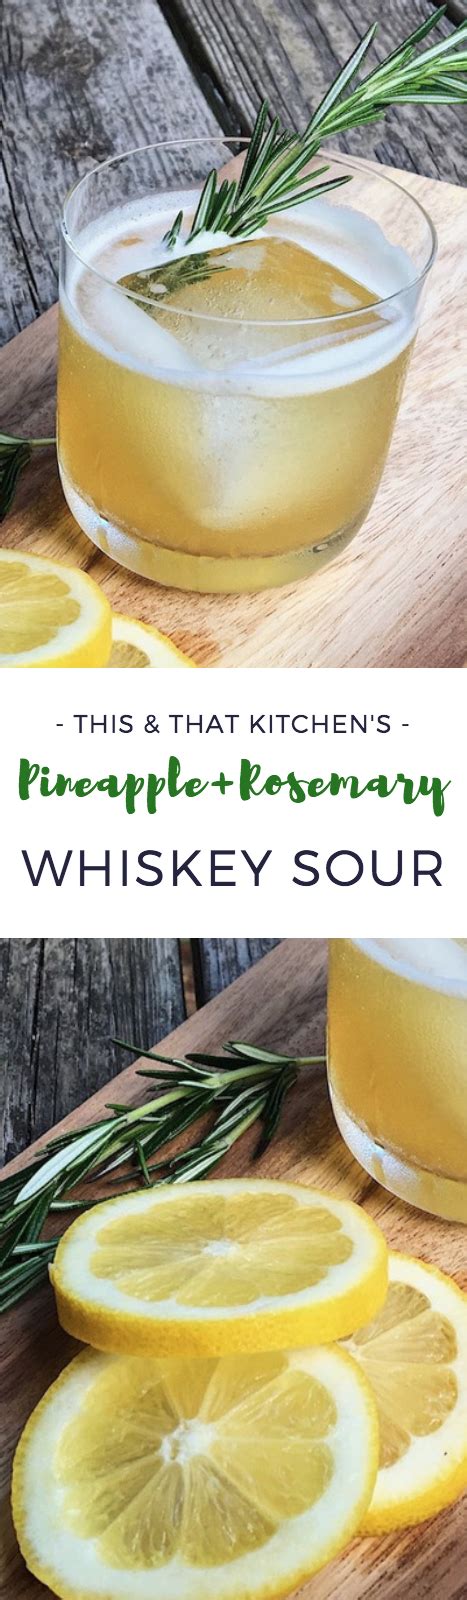 Make sure you thaw it out first! Pineapple-Rosemary Whiskey Sour | Recipe | Whiskey sour ...